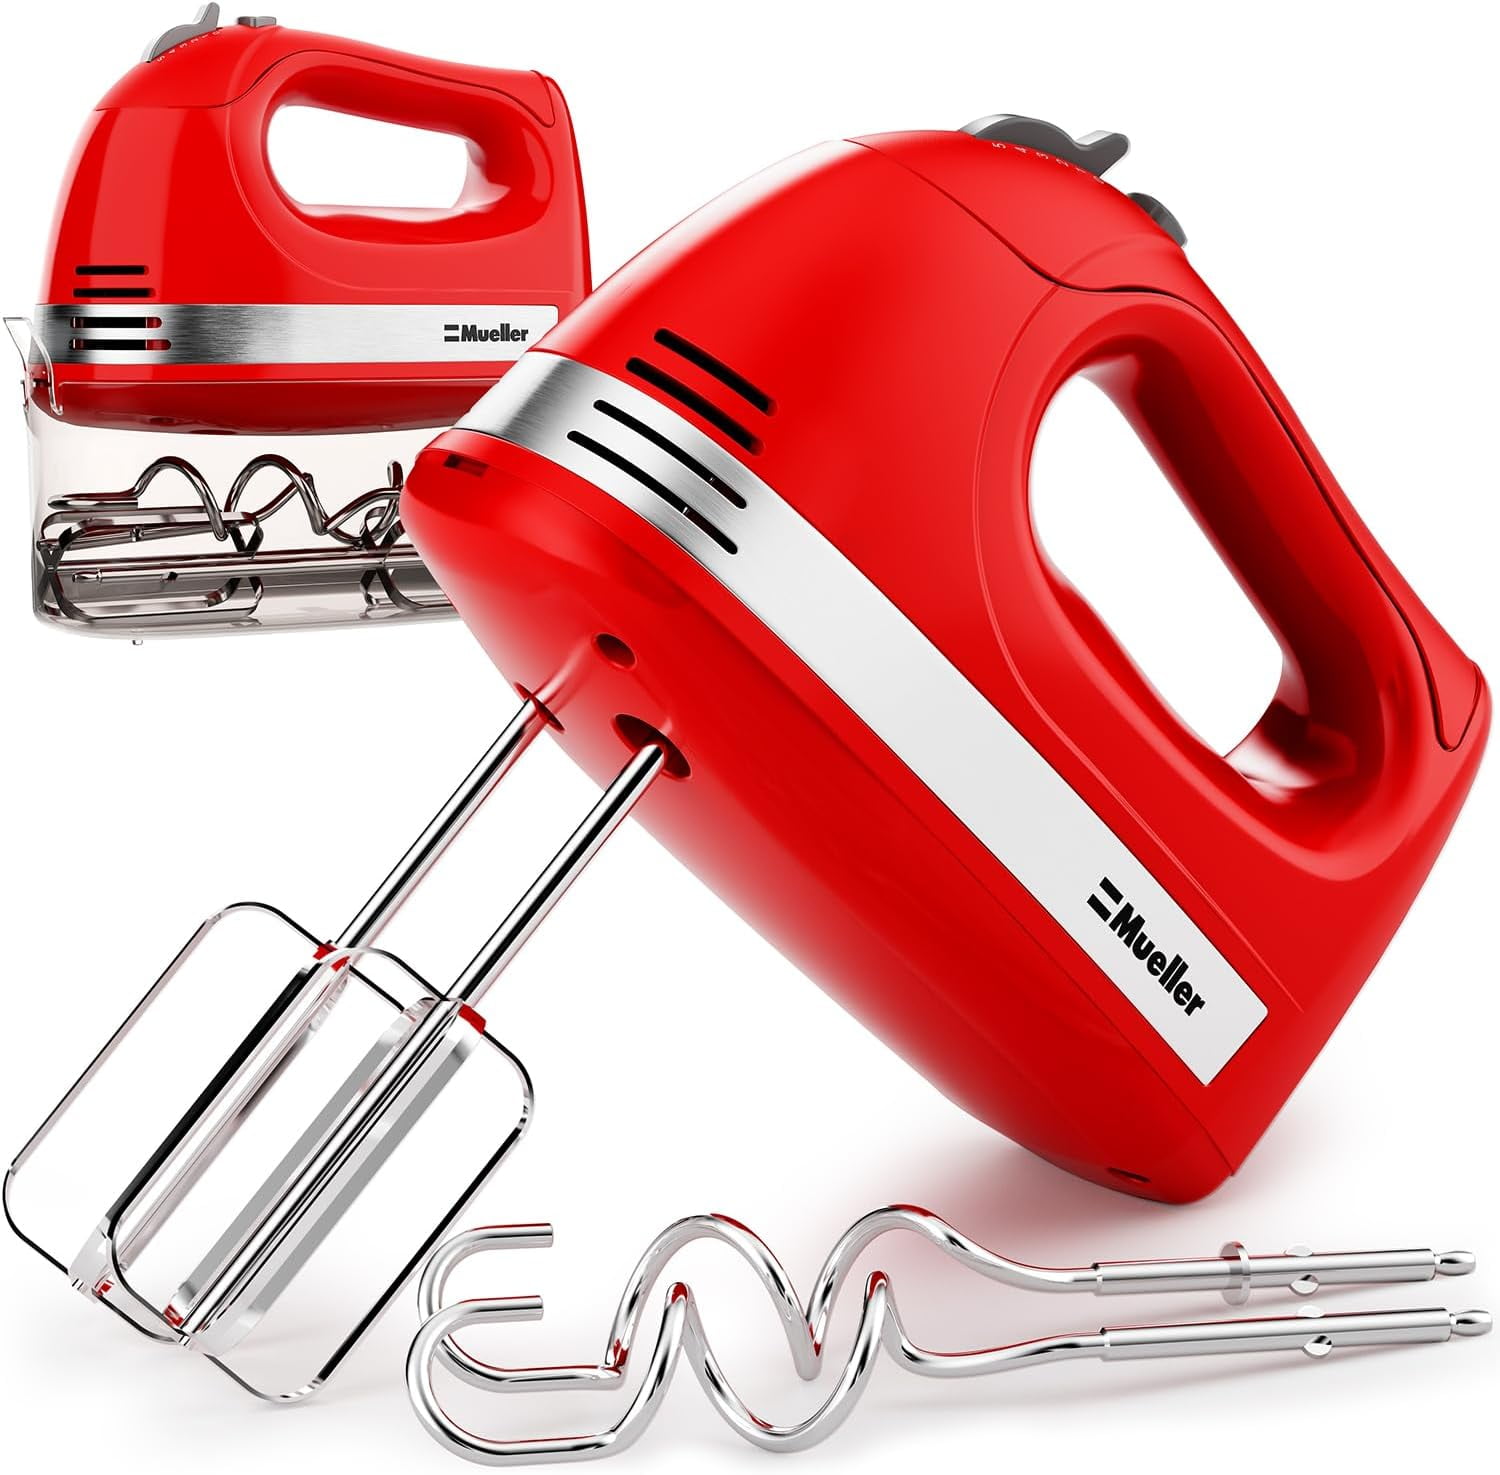 Dropship Egg Beater Manual Hand Mixer Red Stainless Steel Wire